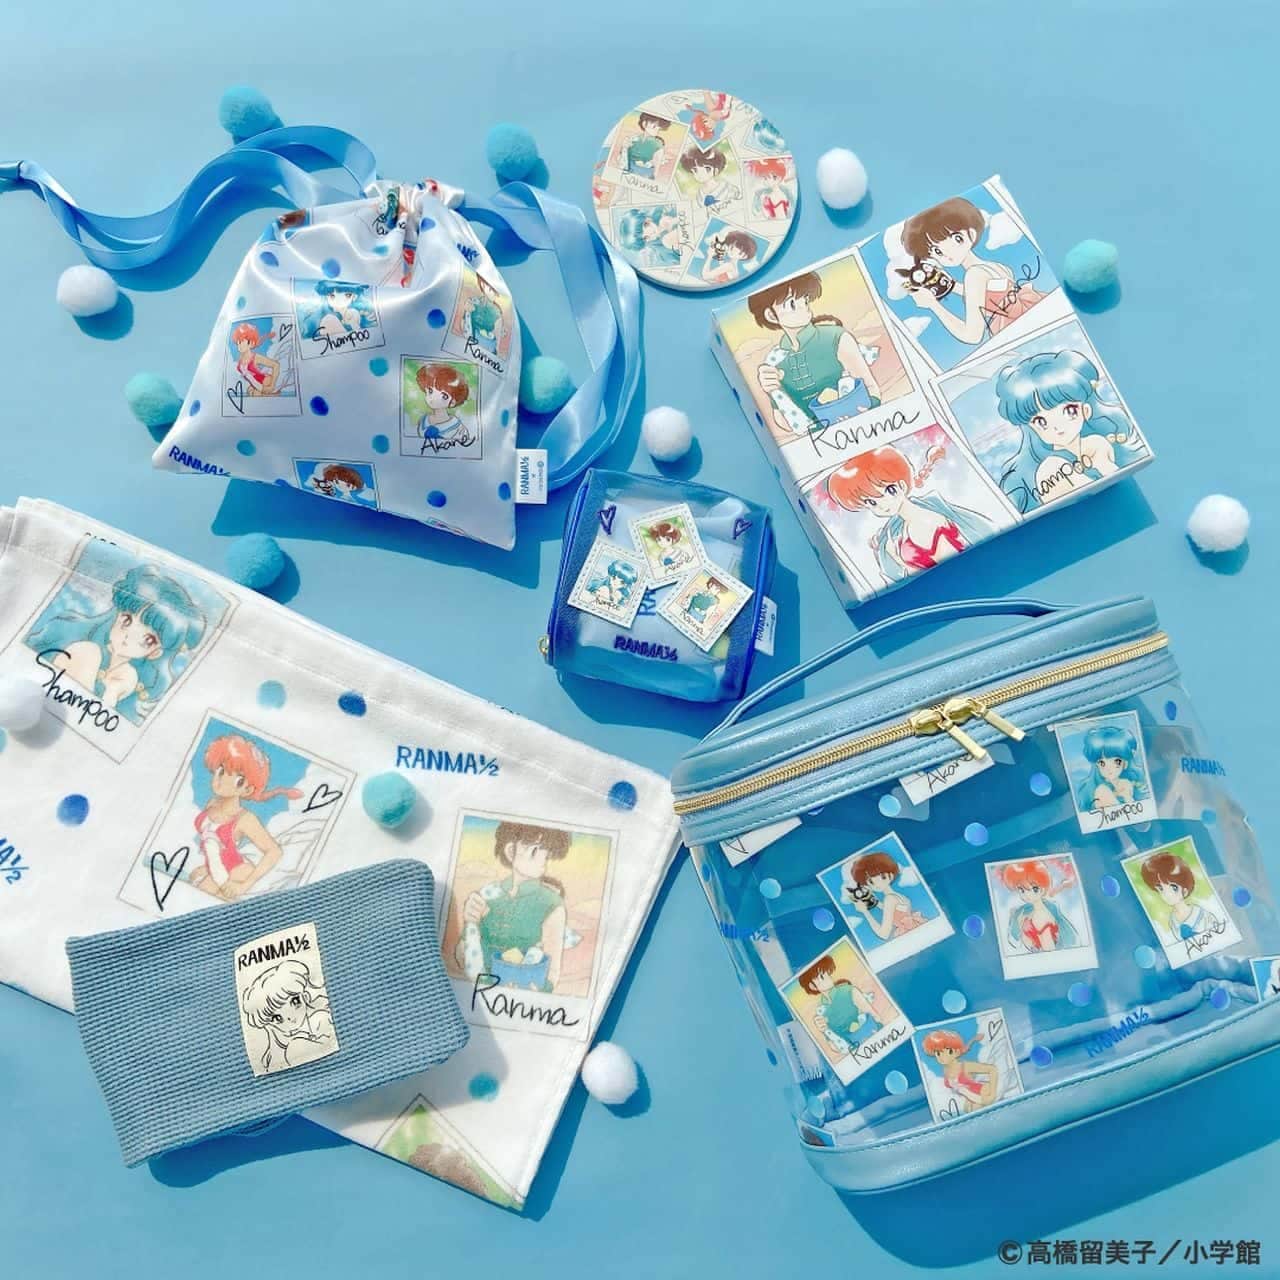 Ranma 1/2" × It's Demo collaboration products